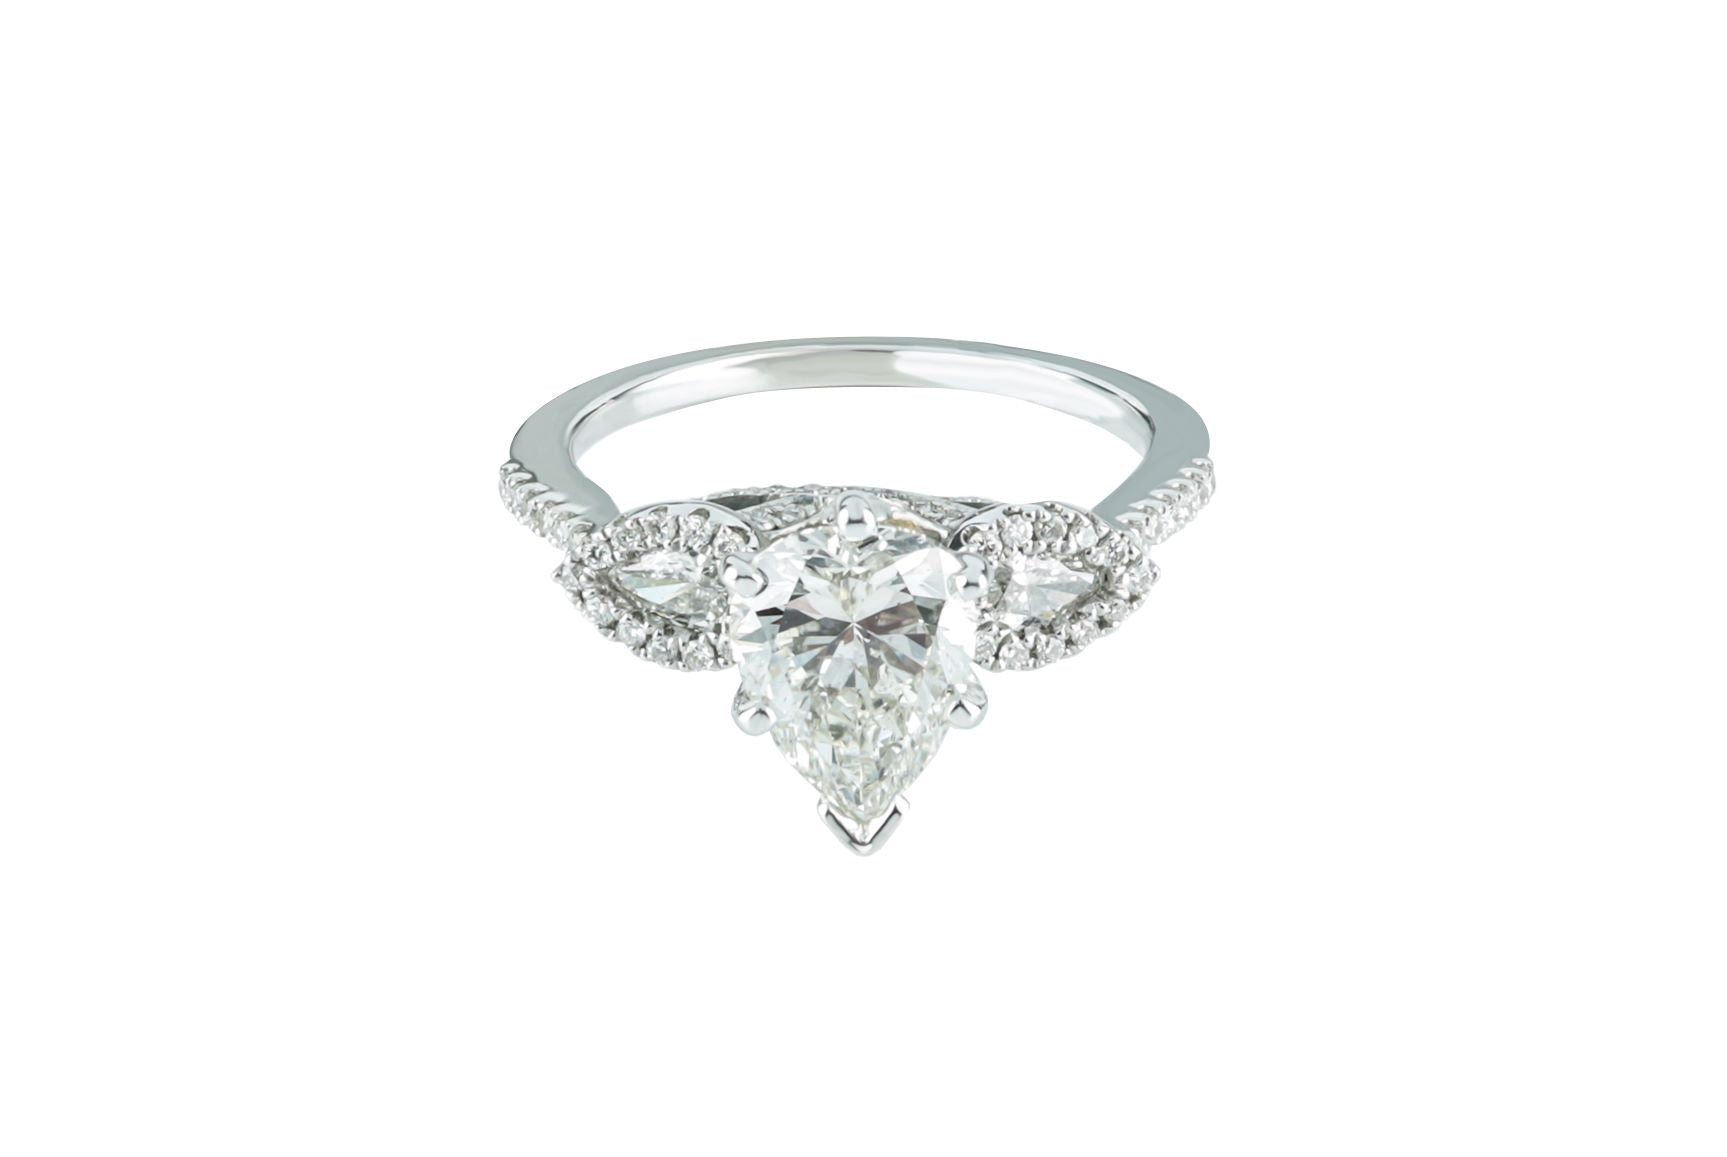 2 ctw GIA Certified Pear Cut Diamond Engagement Ring